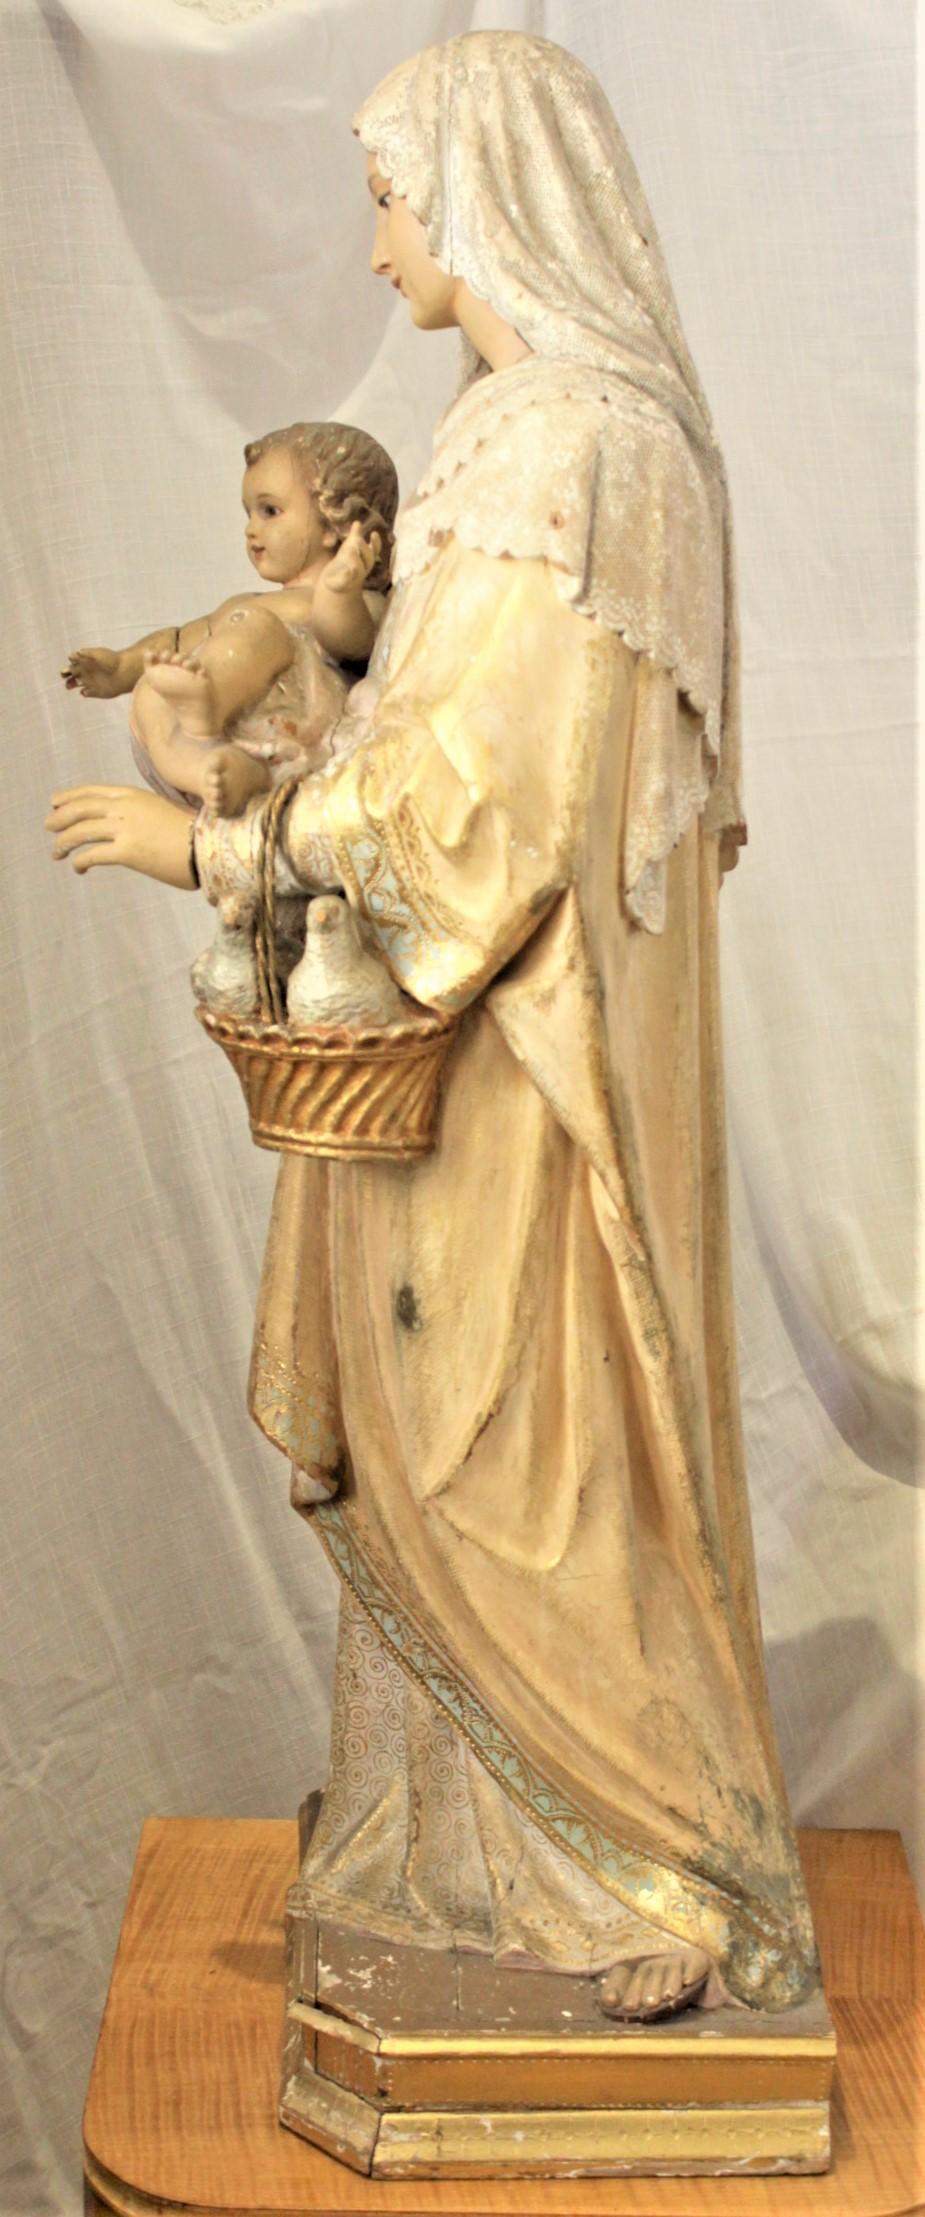 Edwardian Antique Hand-Carved & Polychrome Painted Sculpture of The Madonna and Child